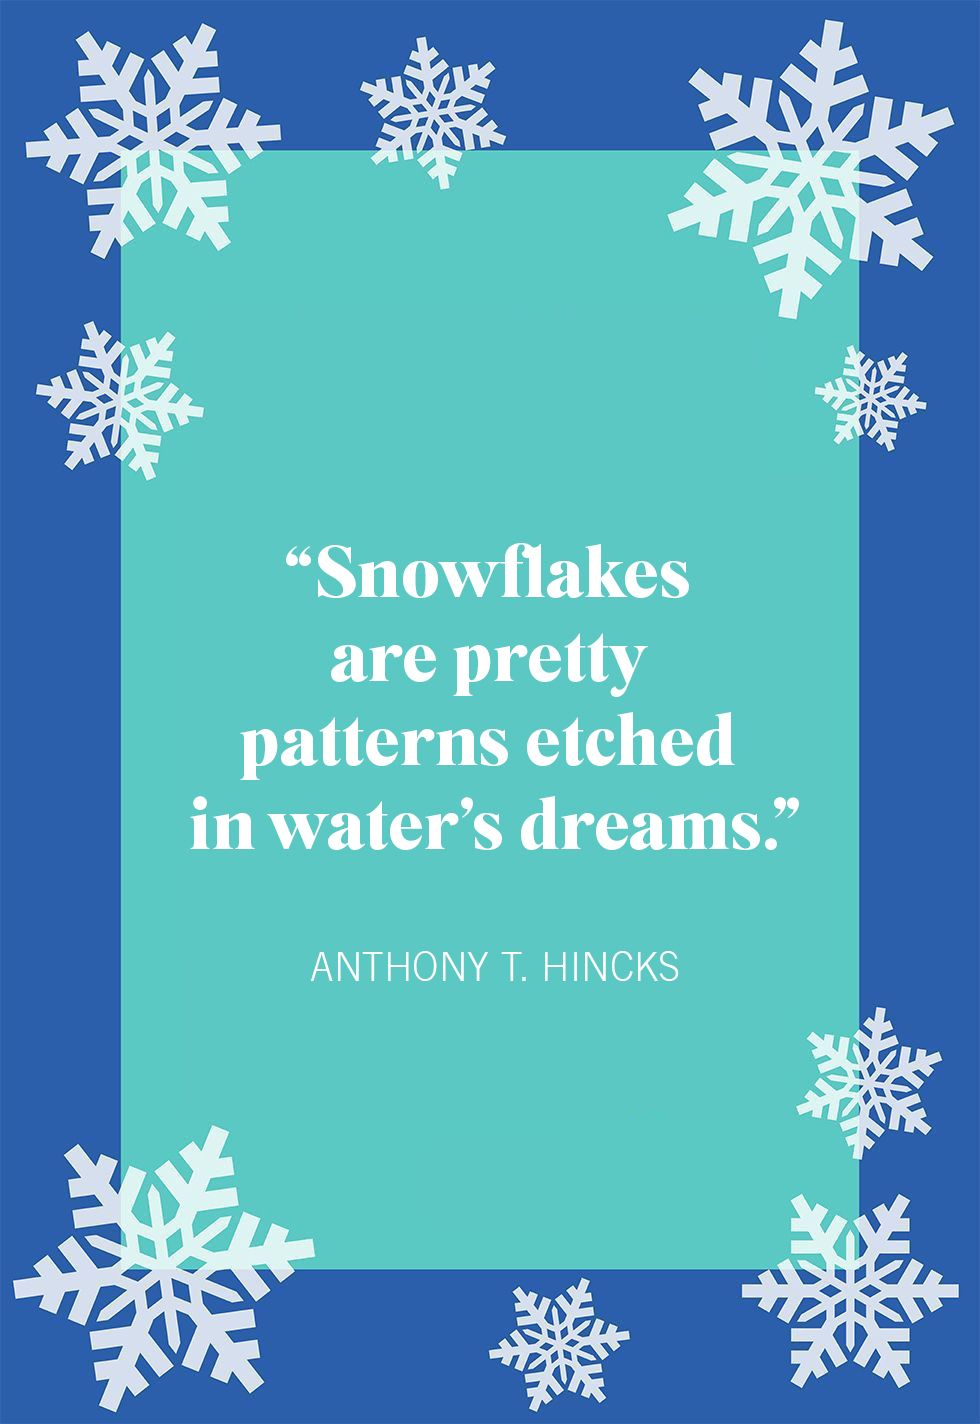 20 Best Snow Quotes - Cute Snow Quotes and Sayings